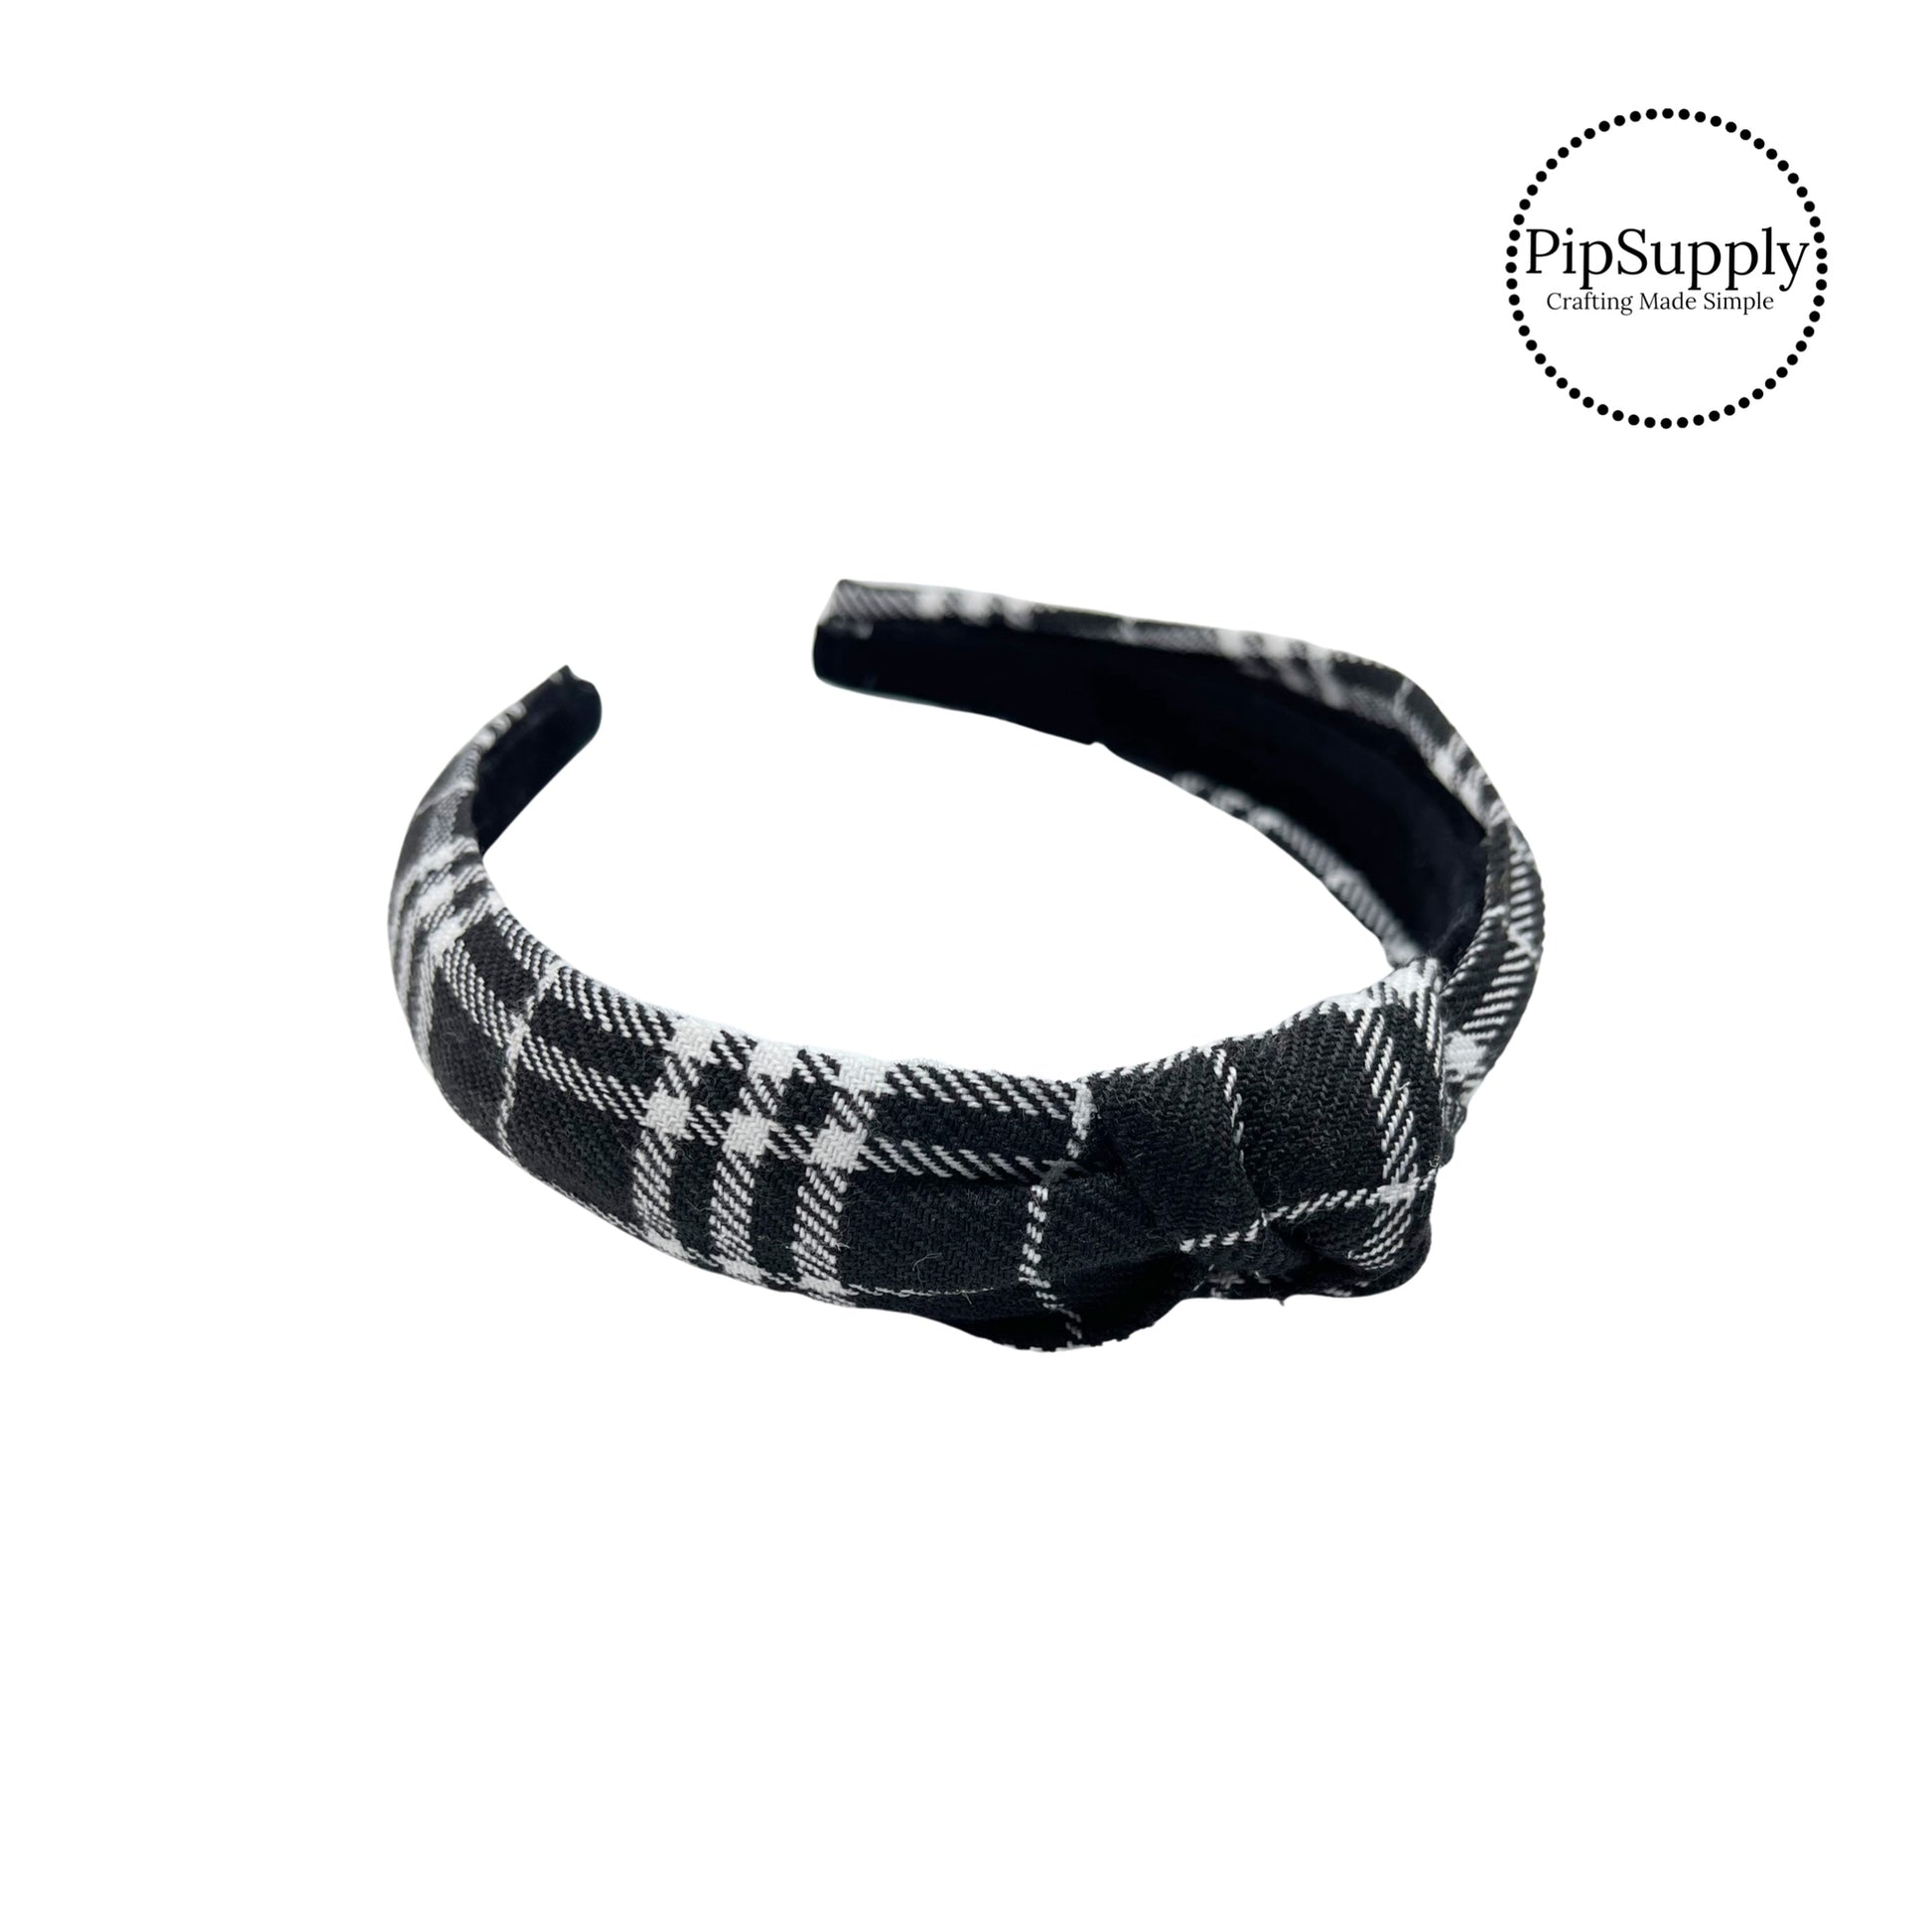 Black and white plaid woven knotted headband